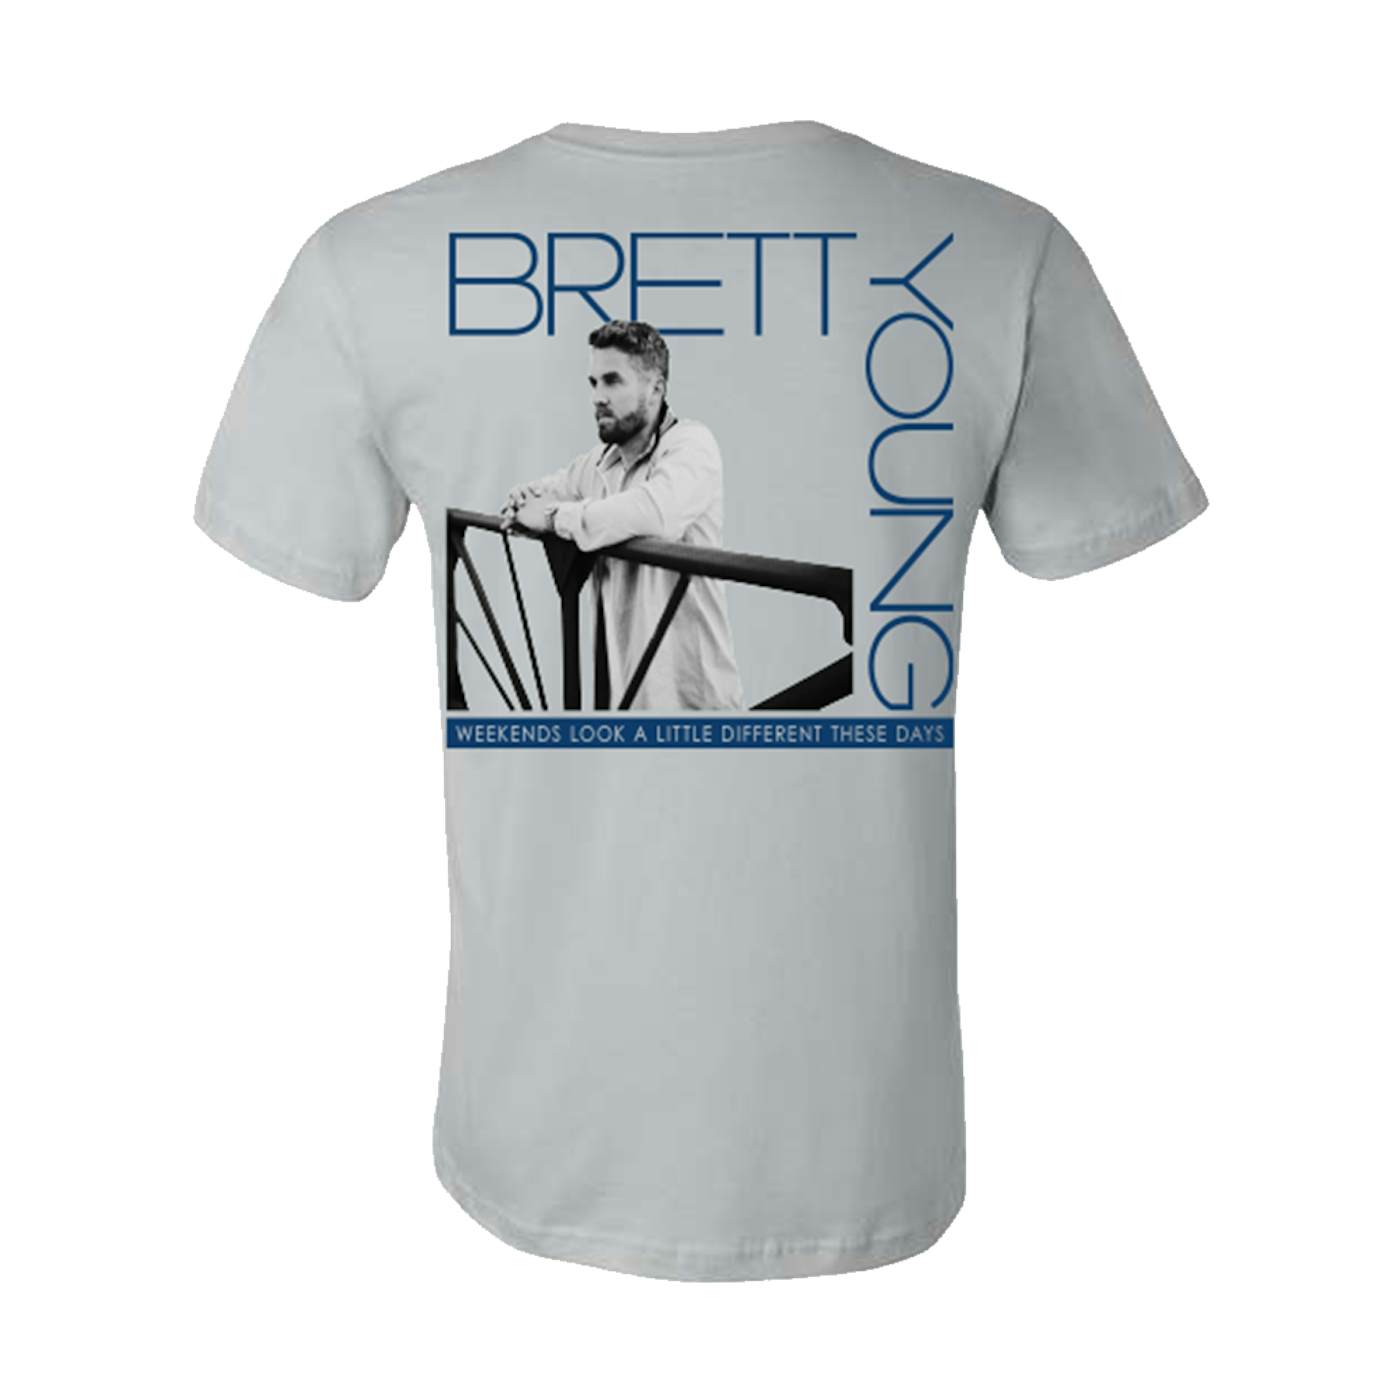 Brett Young Weekends Look A Little Different These Days T-Shirt